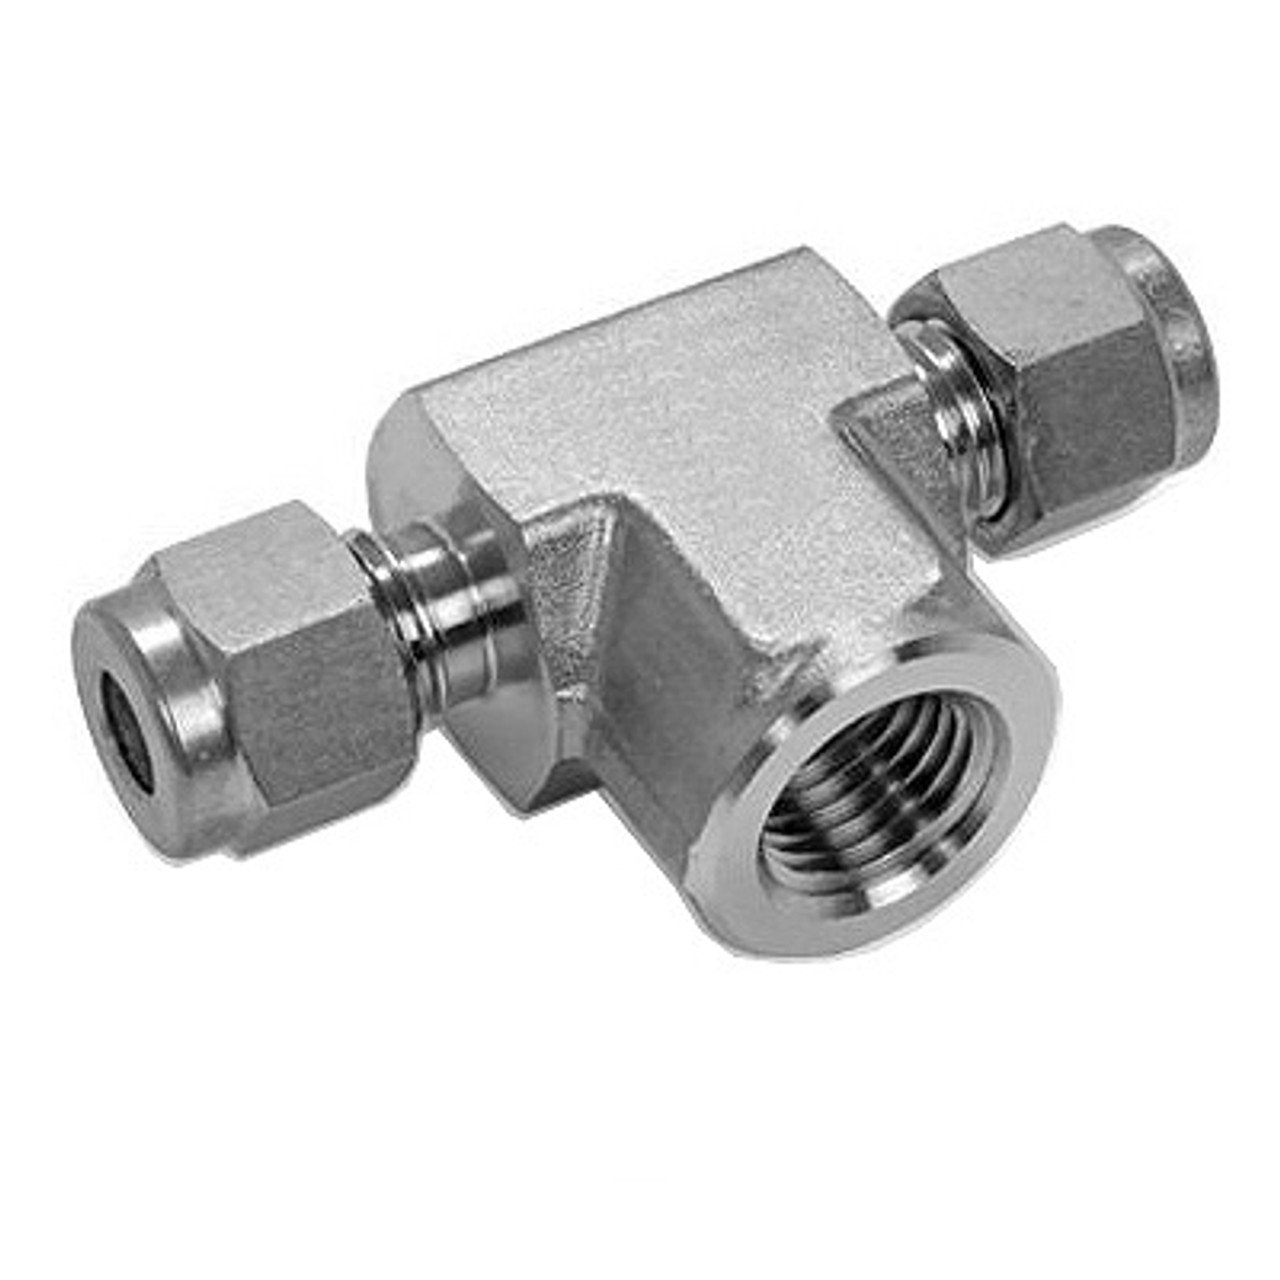 Compression Fittings Stainless Steel, 1/4" Tube x 1/8" NPT Female 1 4 Stainless Steel Compression Fittings